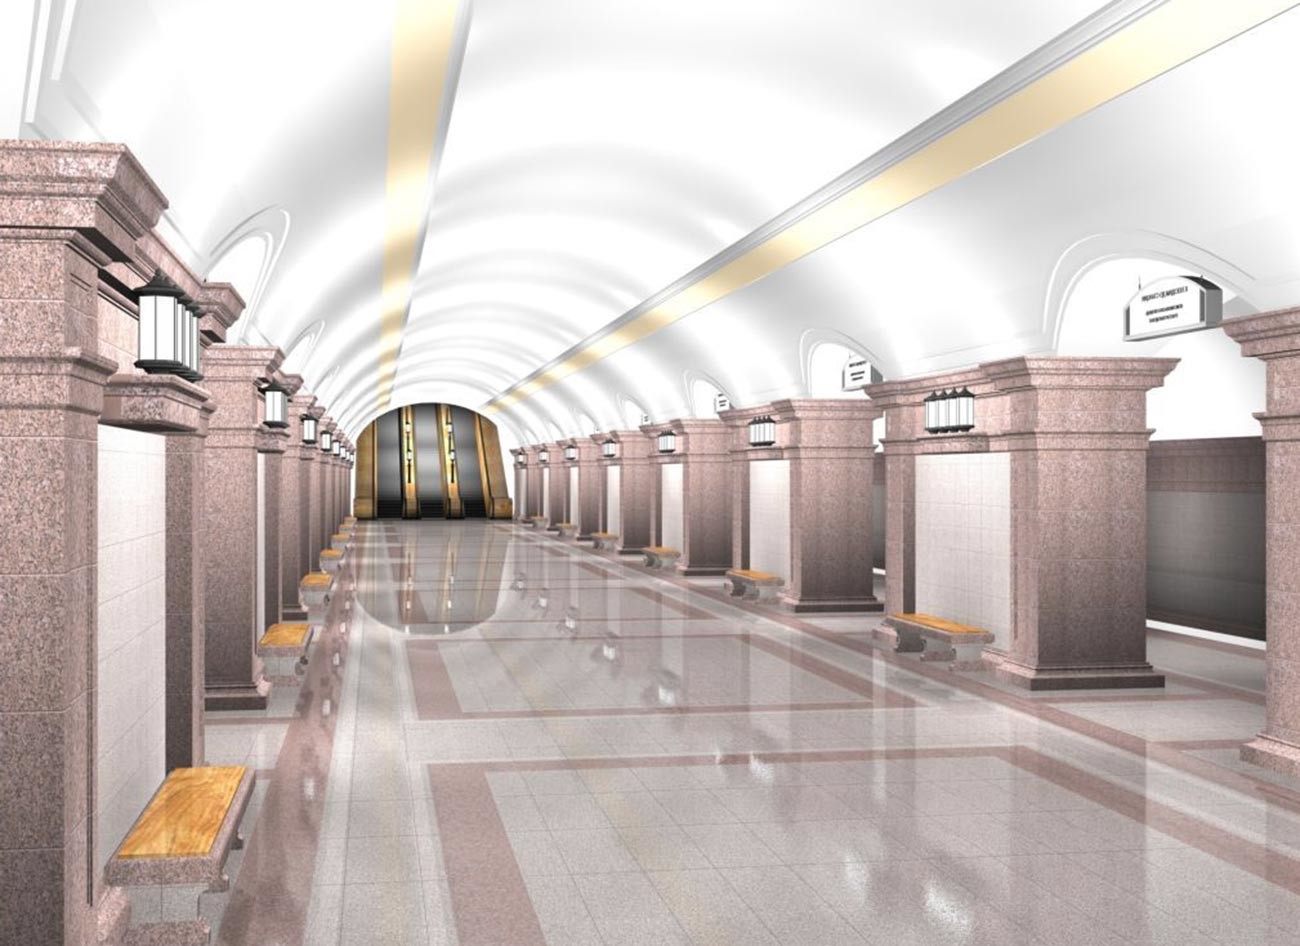 This is how a station in Chelyabinsk metro could look like. 